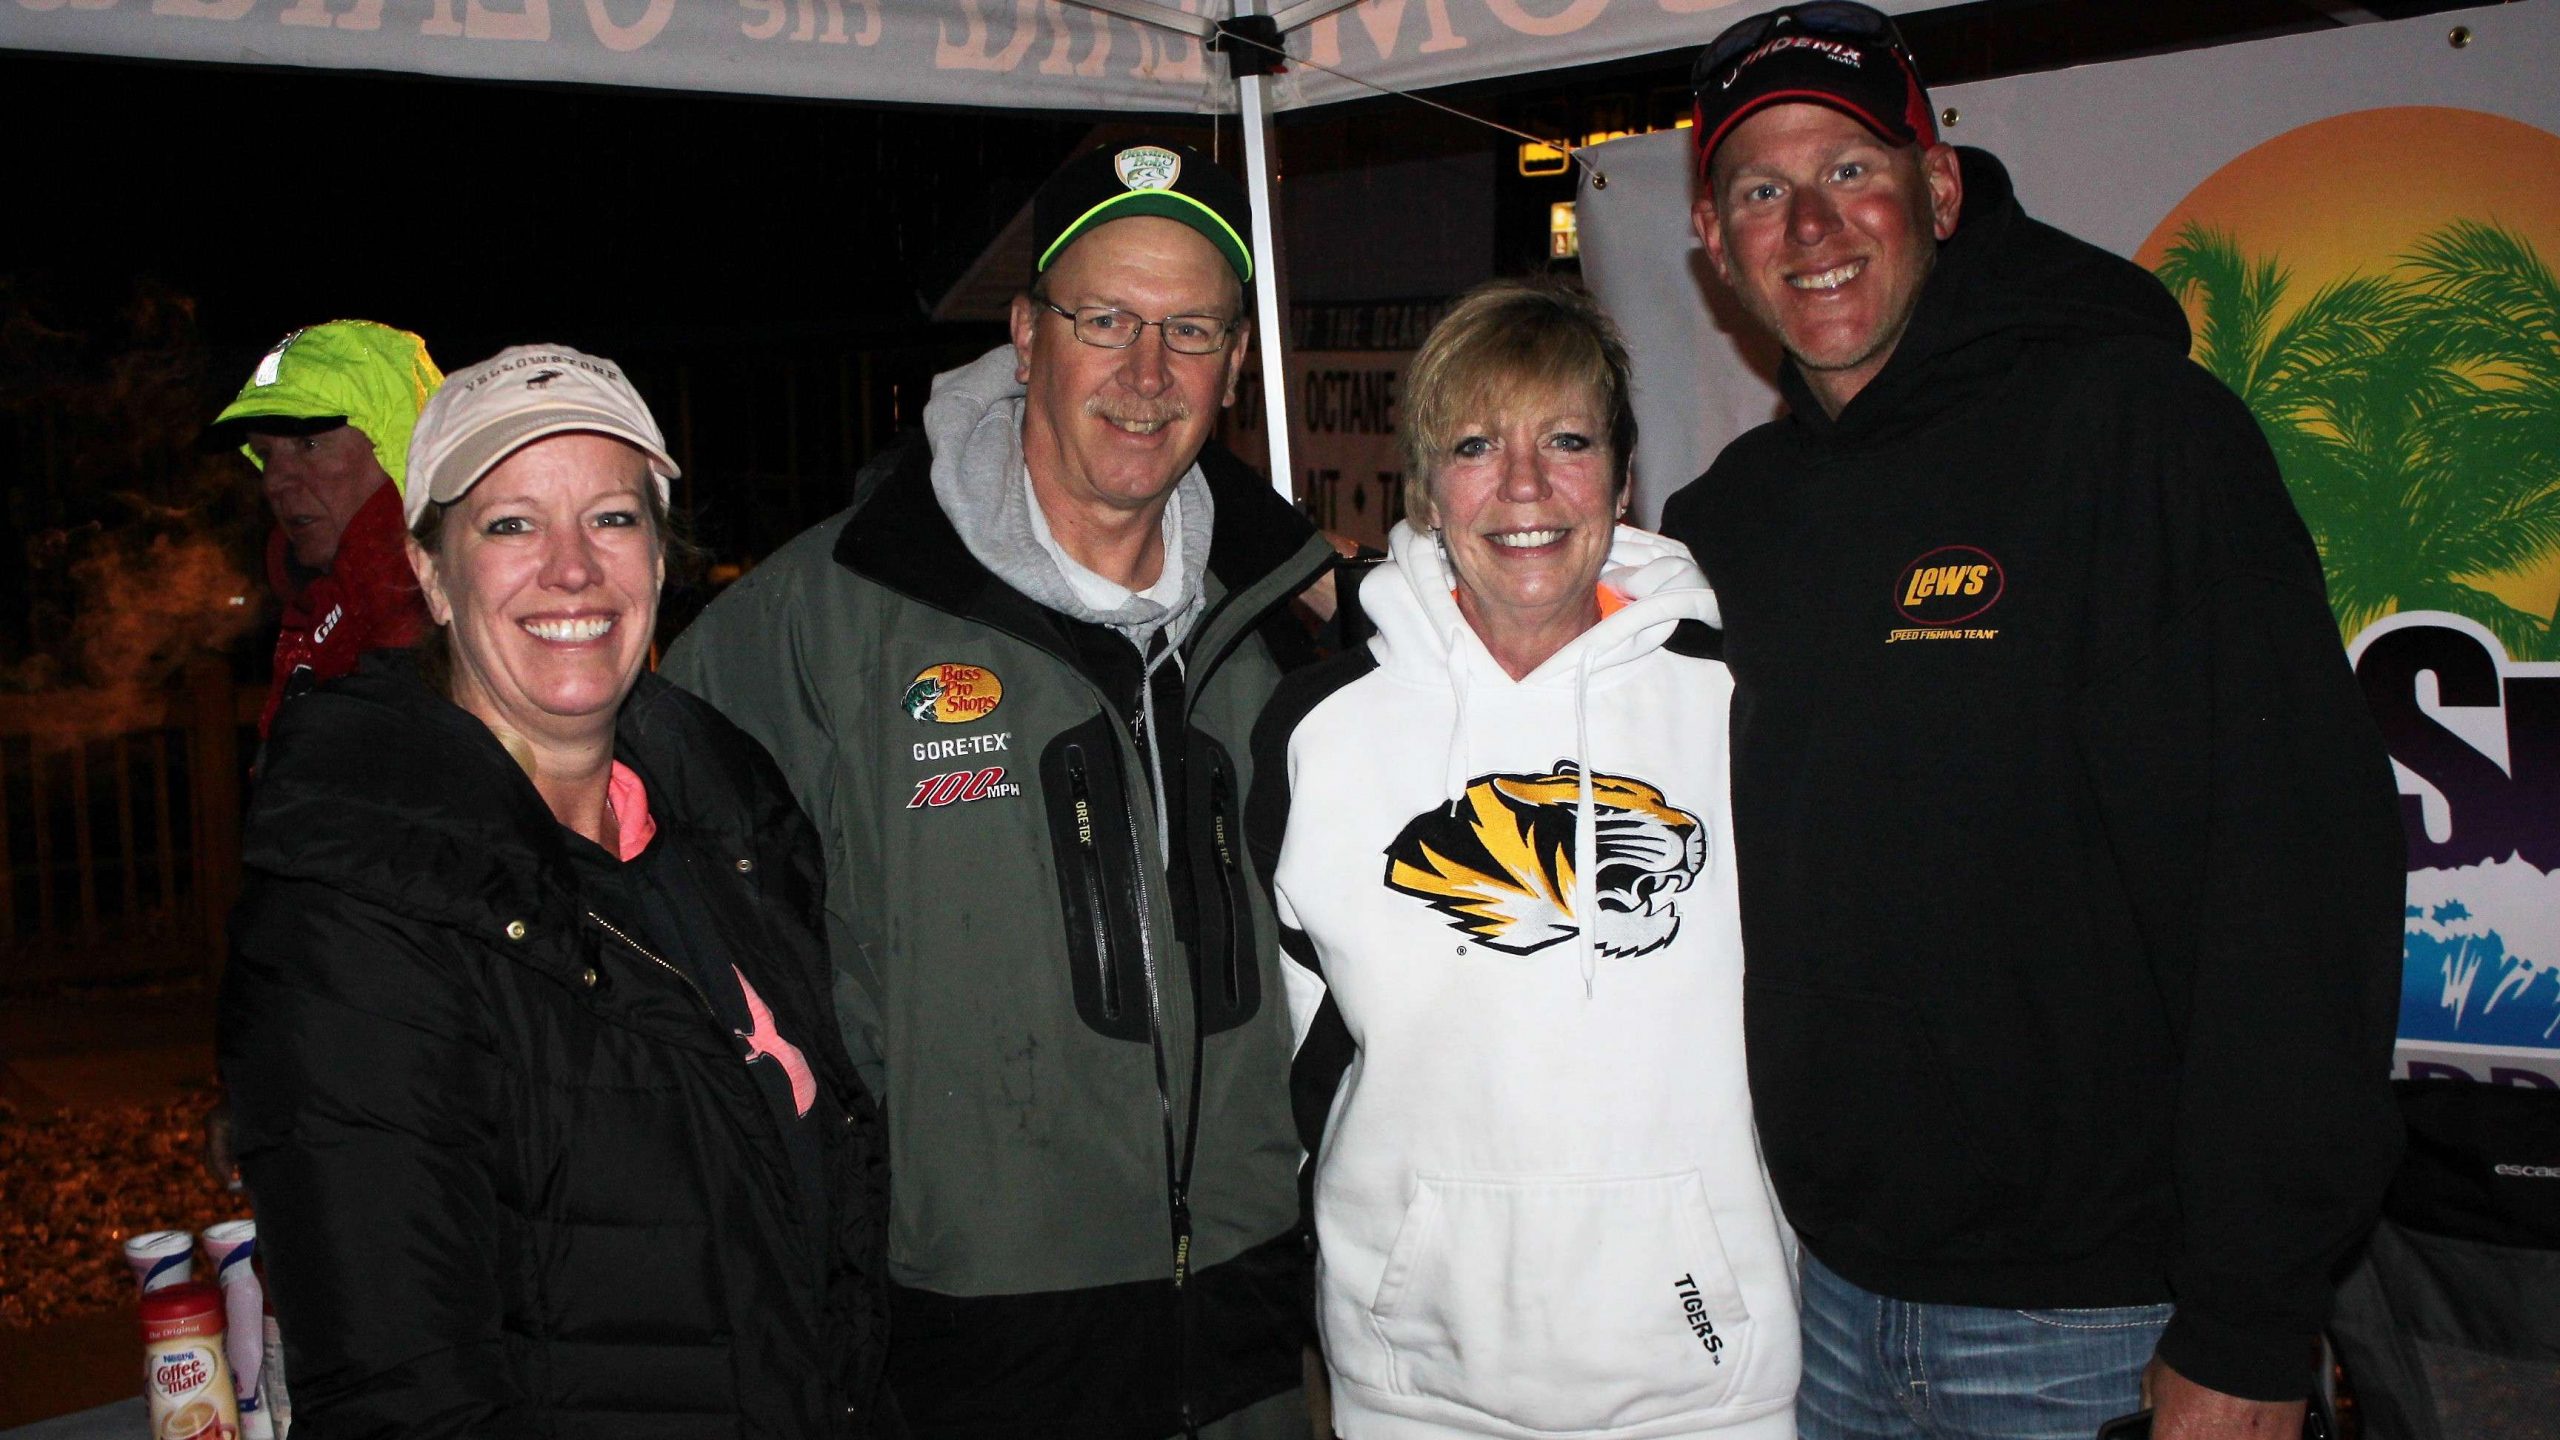  Bassing Bob crew on hand to greet the young anglers Sunday morning included, from left, Christi Boone, Steve Heitman, Diane Roling, and Rob Bueltmann. Theyâre happy to do it too. Check out their page on Facebook.